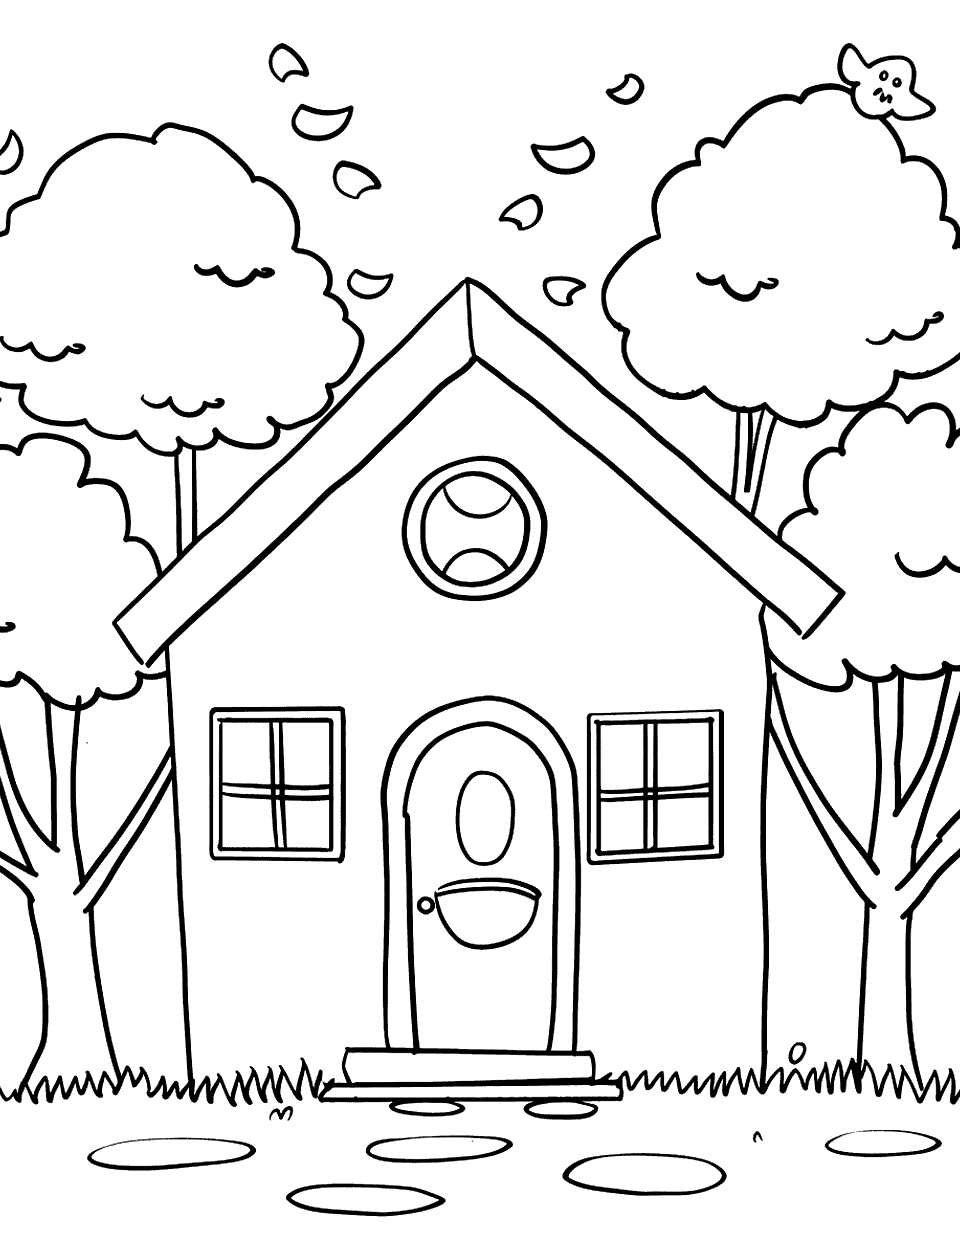 Square-Shaped House Adventure Shapes Coloring Page - A square house with rectangular windows and an oval door, surrounded by simple trees.